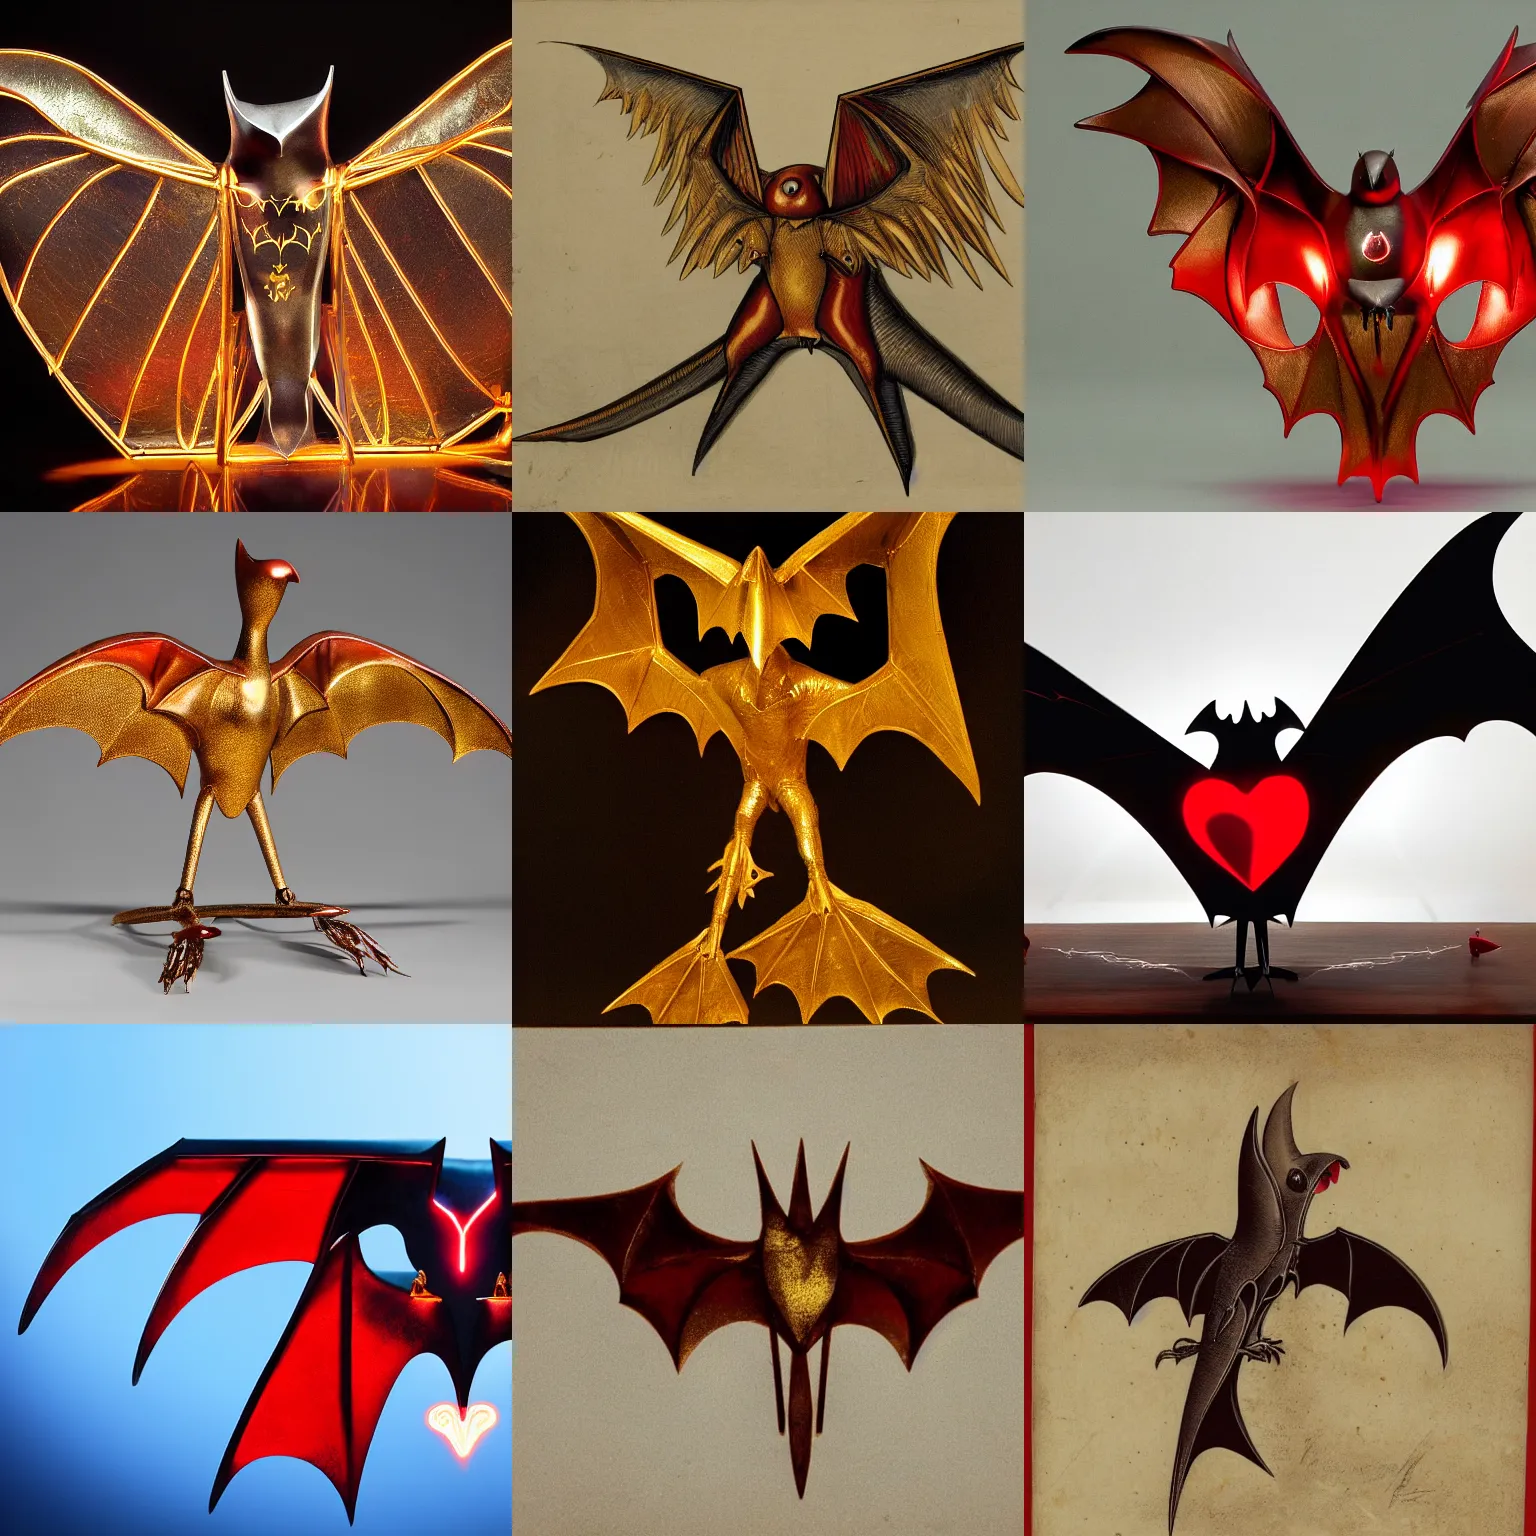 Prompt: a metal bird shaped like a bat with a glowing red heart for a head, a leathery golden body that folds into itself at the joints and wings spread wide as if it is taking off, sitting atop a platform surrounded by an ornate golden frame